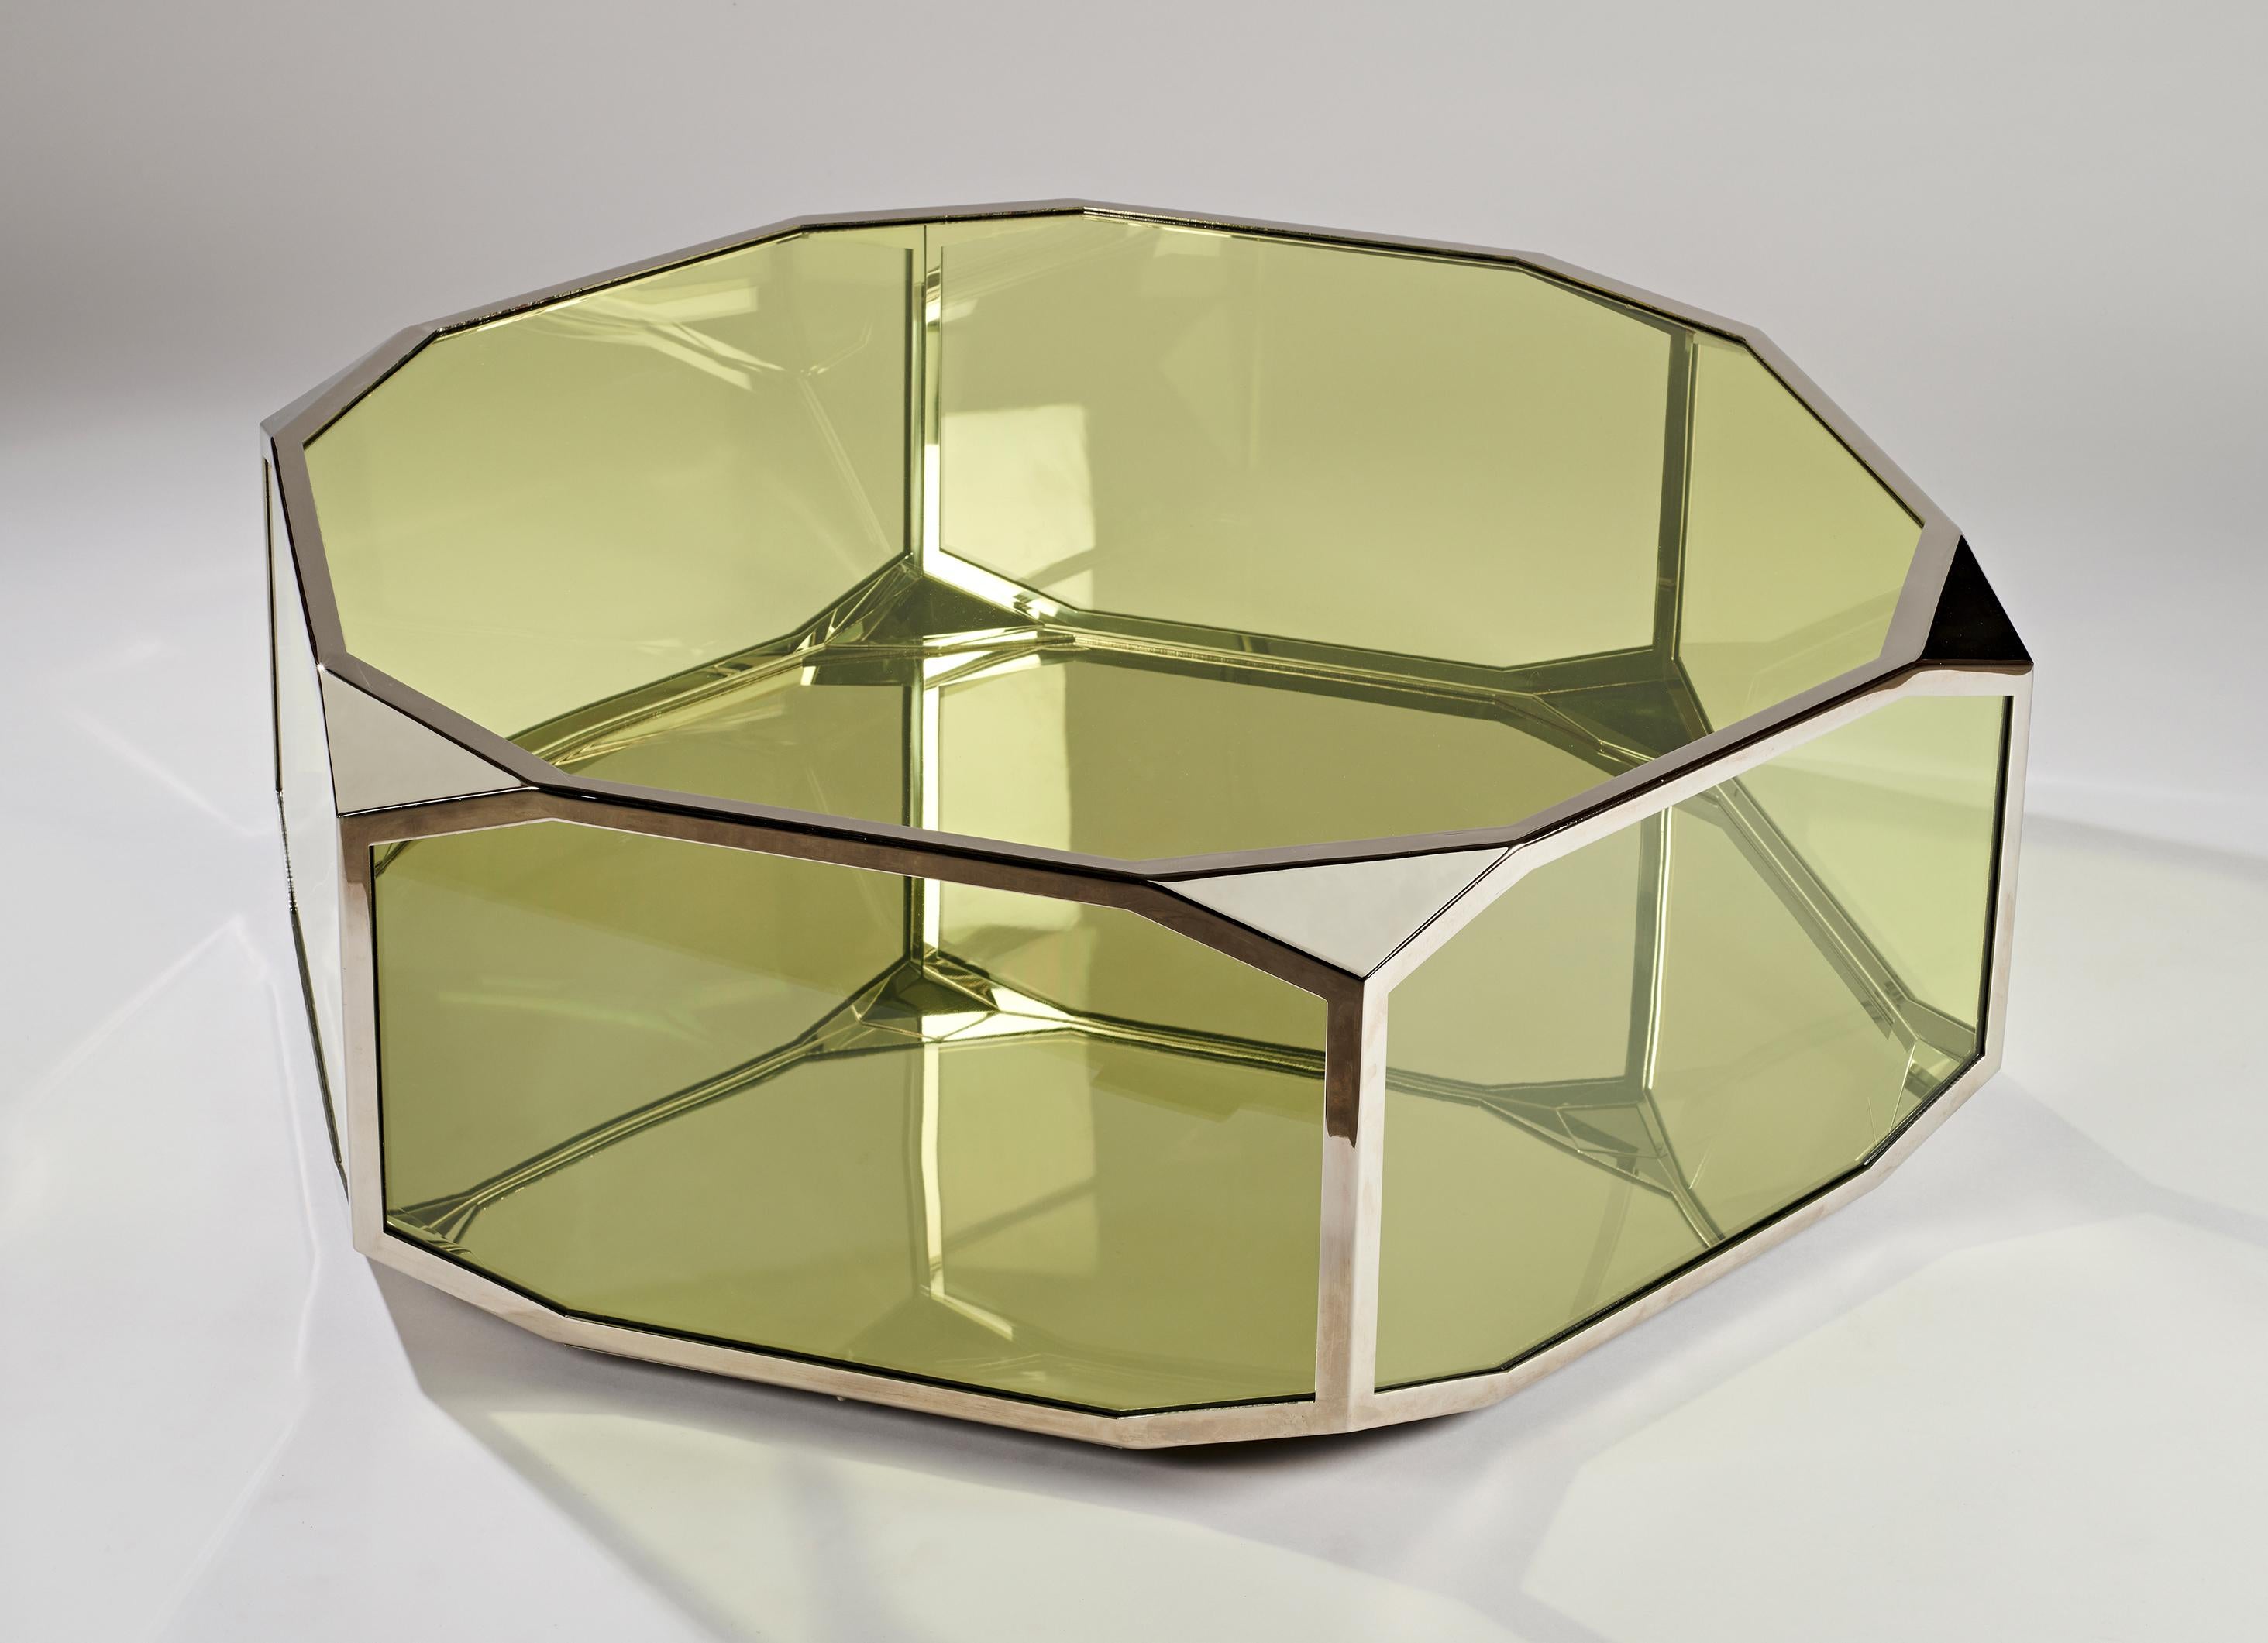 Coffee Table

2017

Nickel plated brass, tinted glass

Various finish options available

Edition of 8 + 4 A.P

Signed and numbered 

Measures: H 15 x W 47.25 in.

( H 38 x W 120 cm).

Maurice Marty's skills cover the gamut of interior, surface and